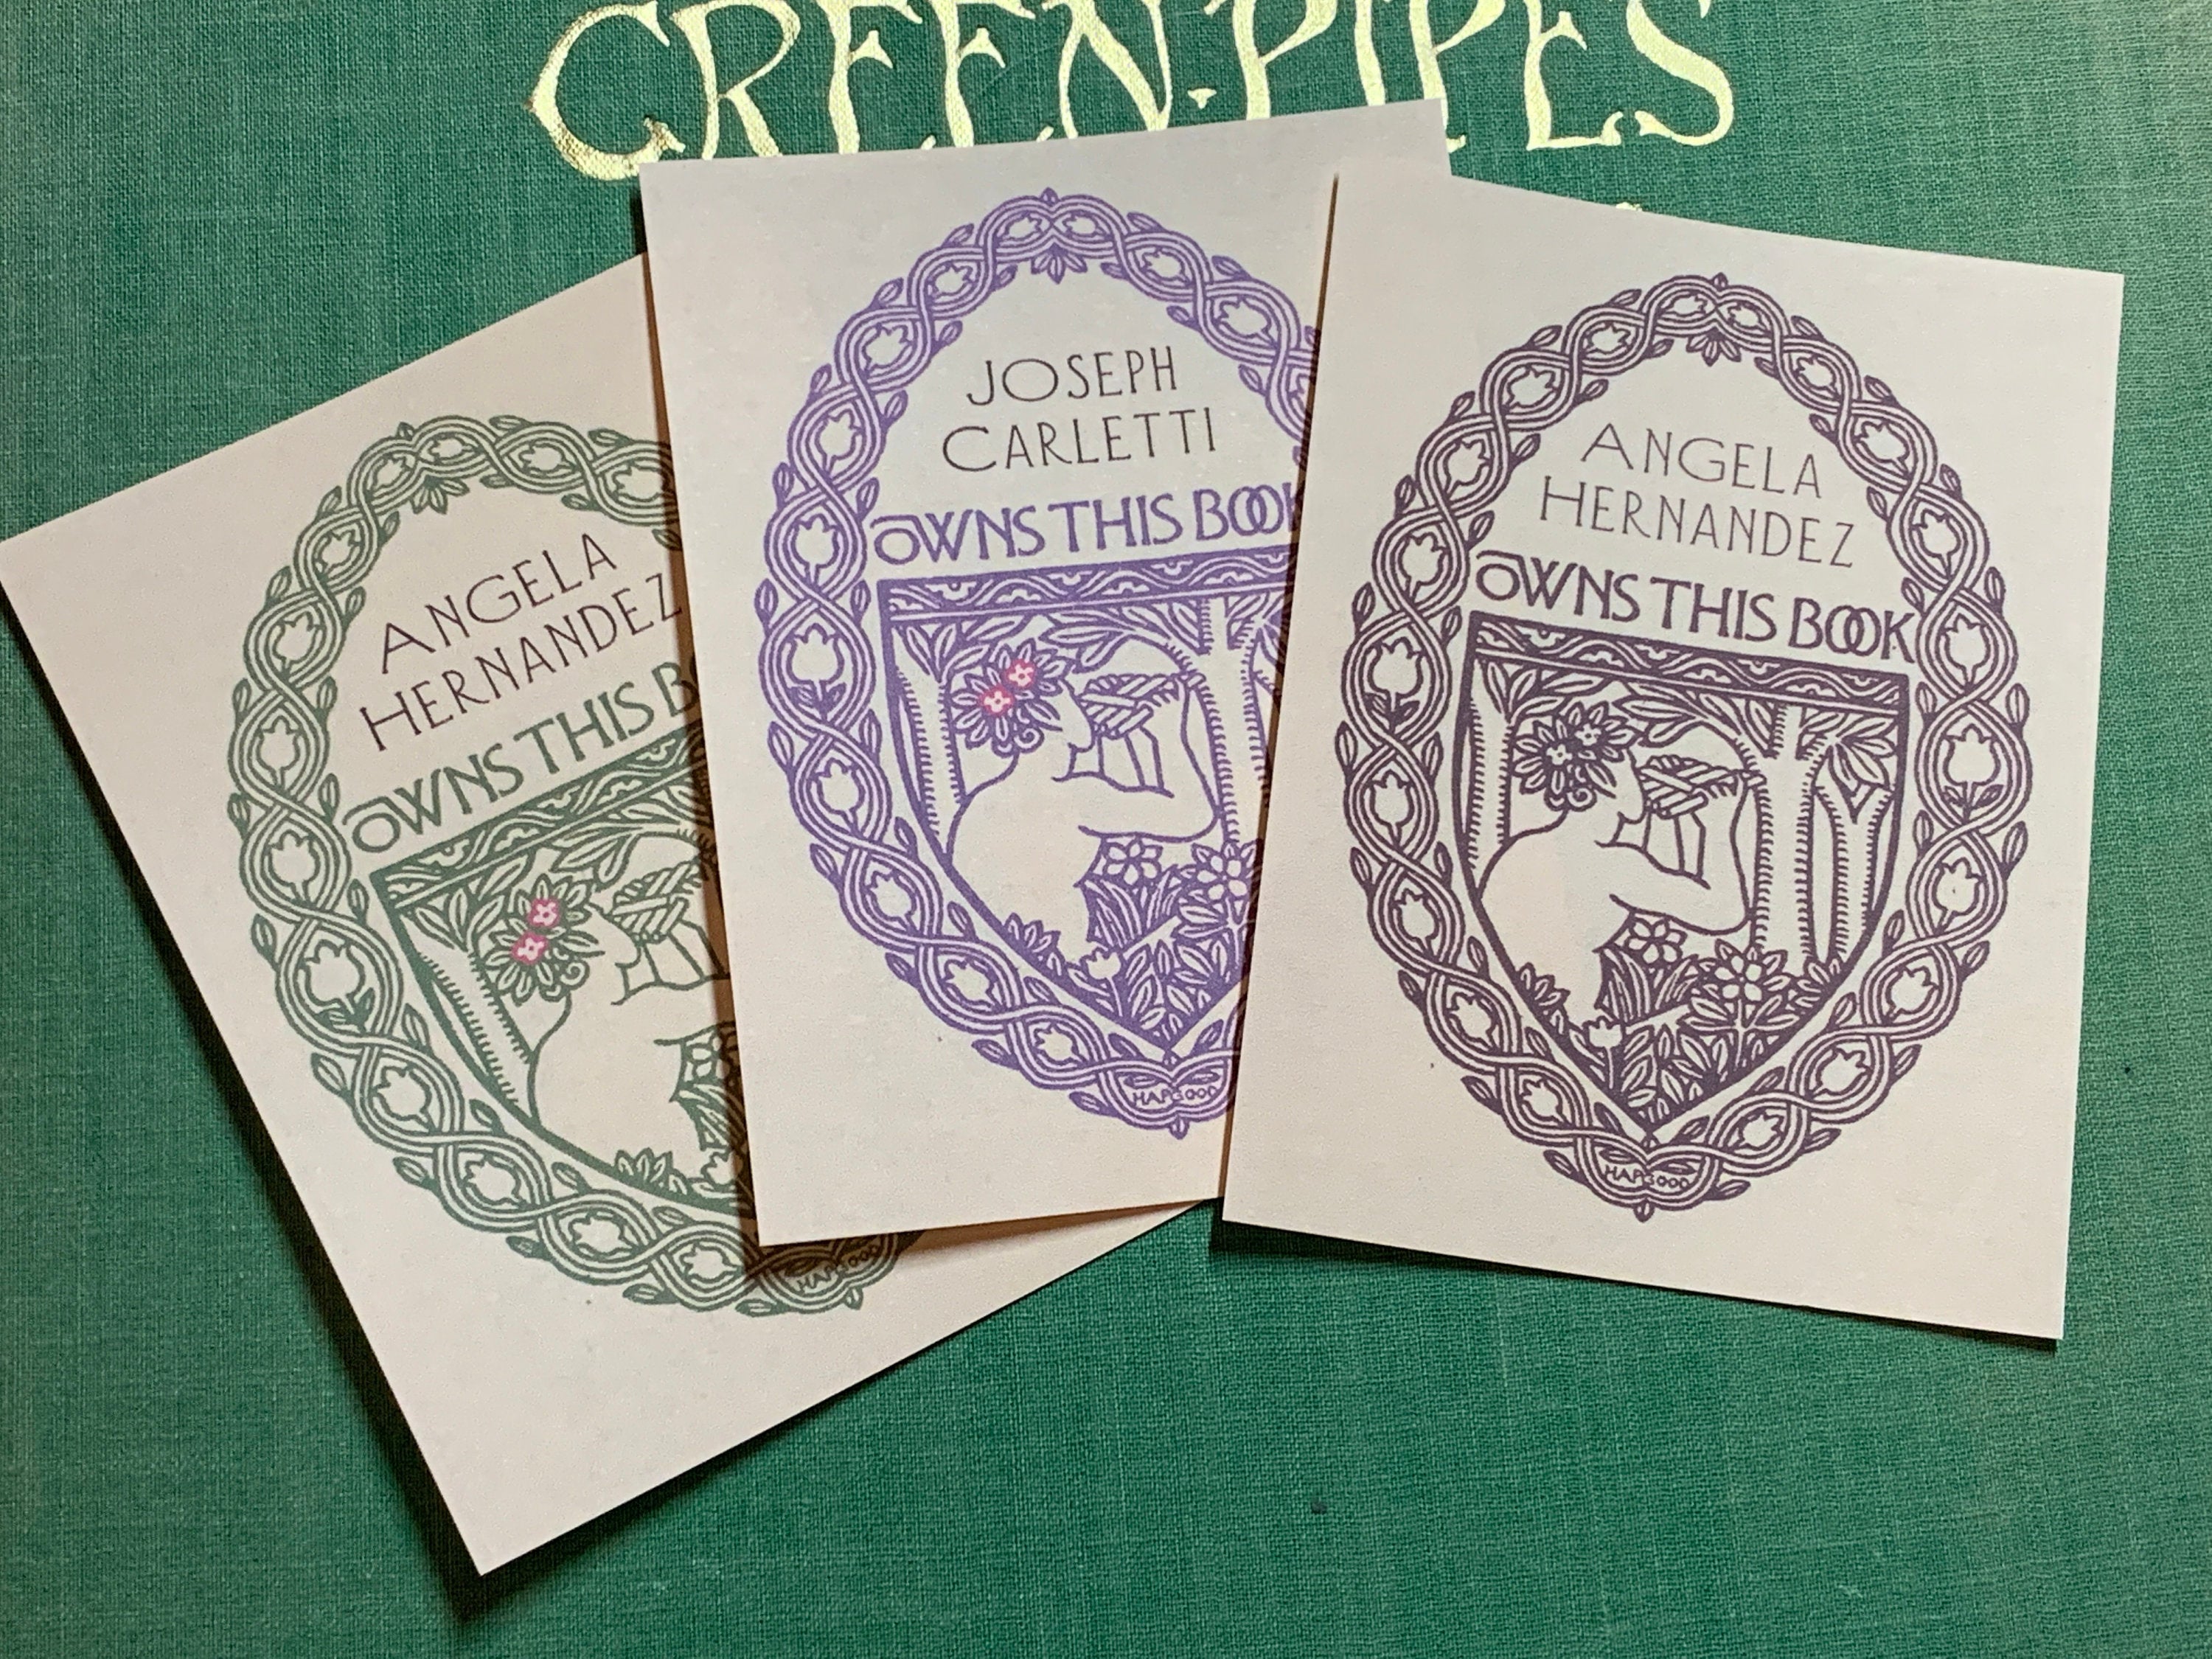 Pan Pipes, Personalized, Ex-Libris Bookplates, Crafted on Traditional Gummed Paper, 3in x 4in, Set of 30